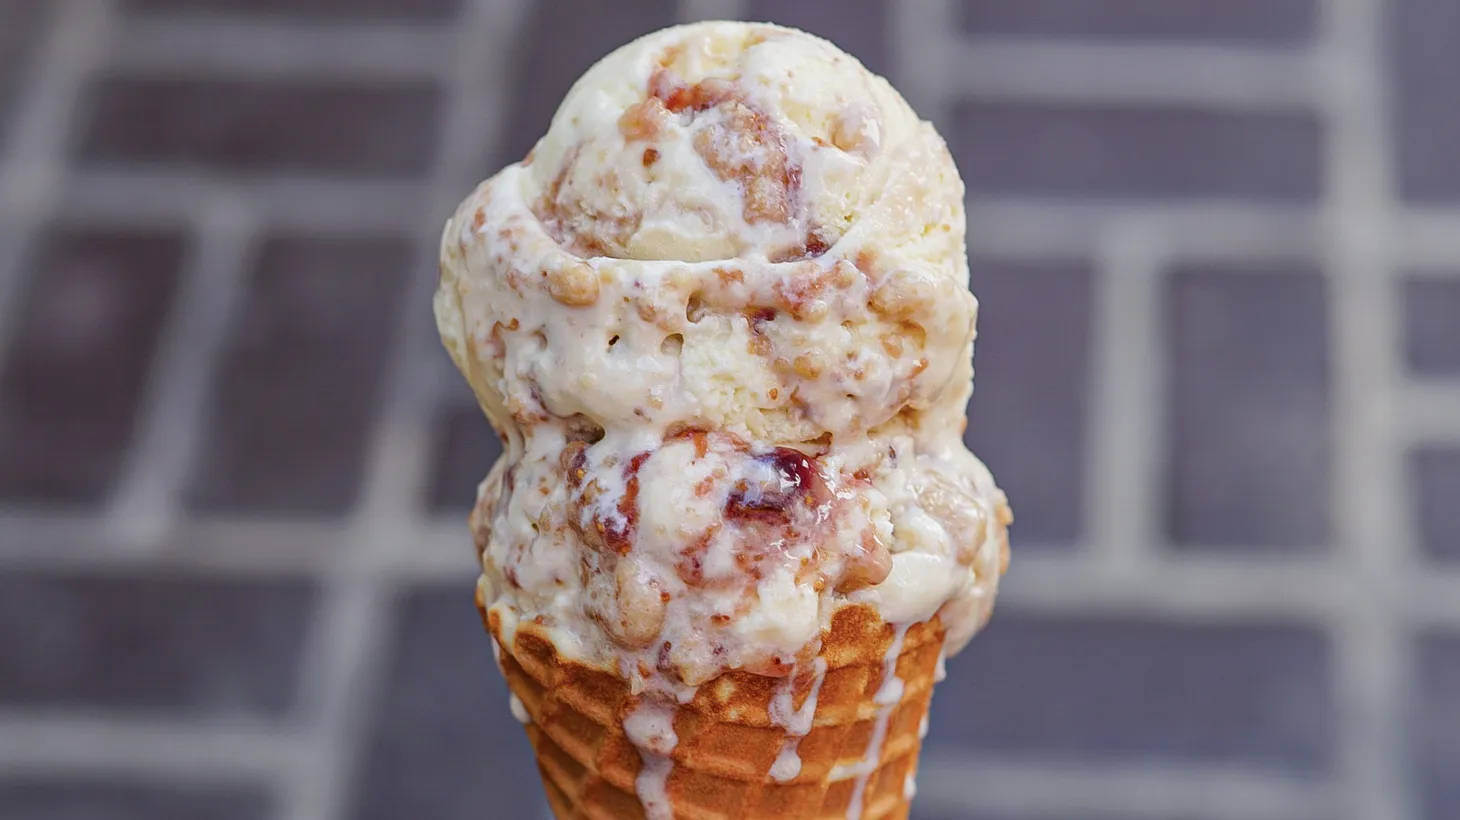 Fig jam with a salty crumble is the flavor of the month at Sweet Rose Creamery. Photo by Lindsey Huttrer.